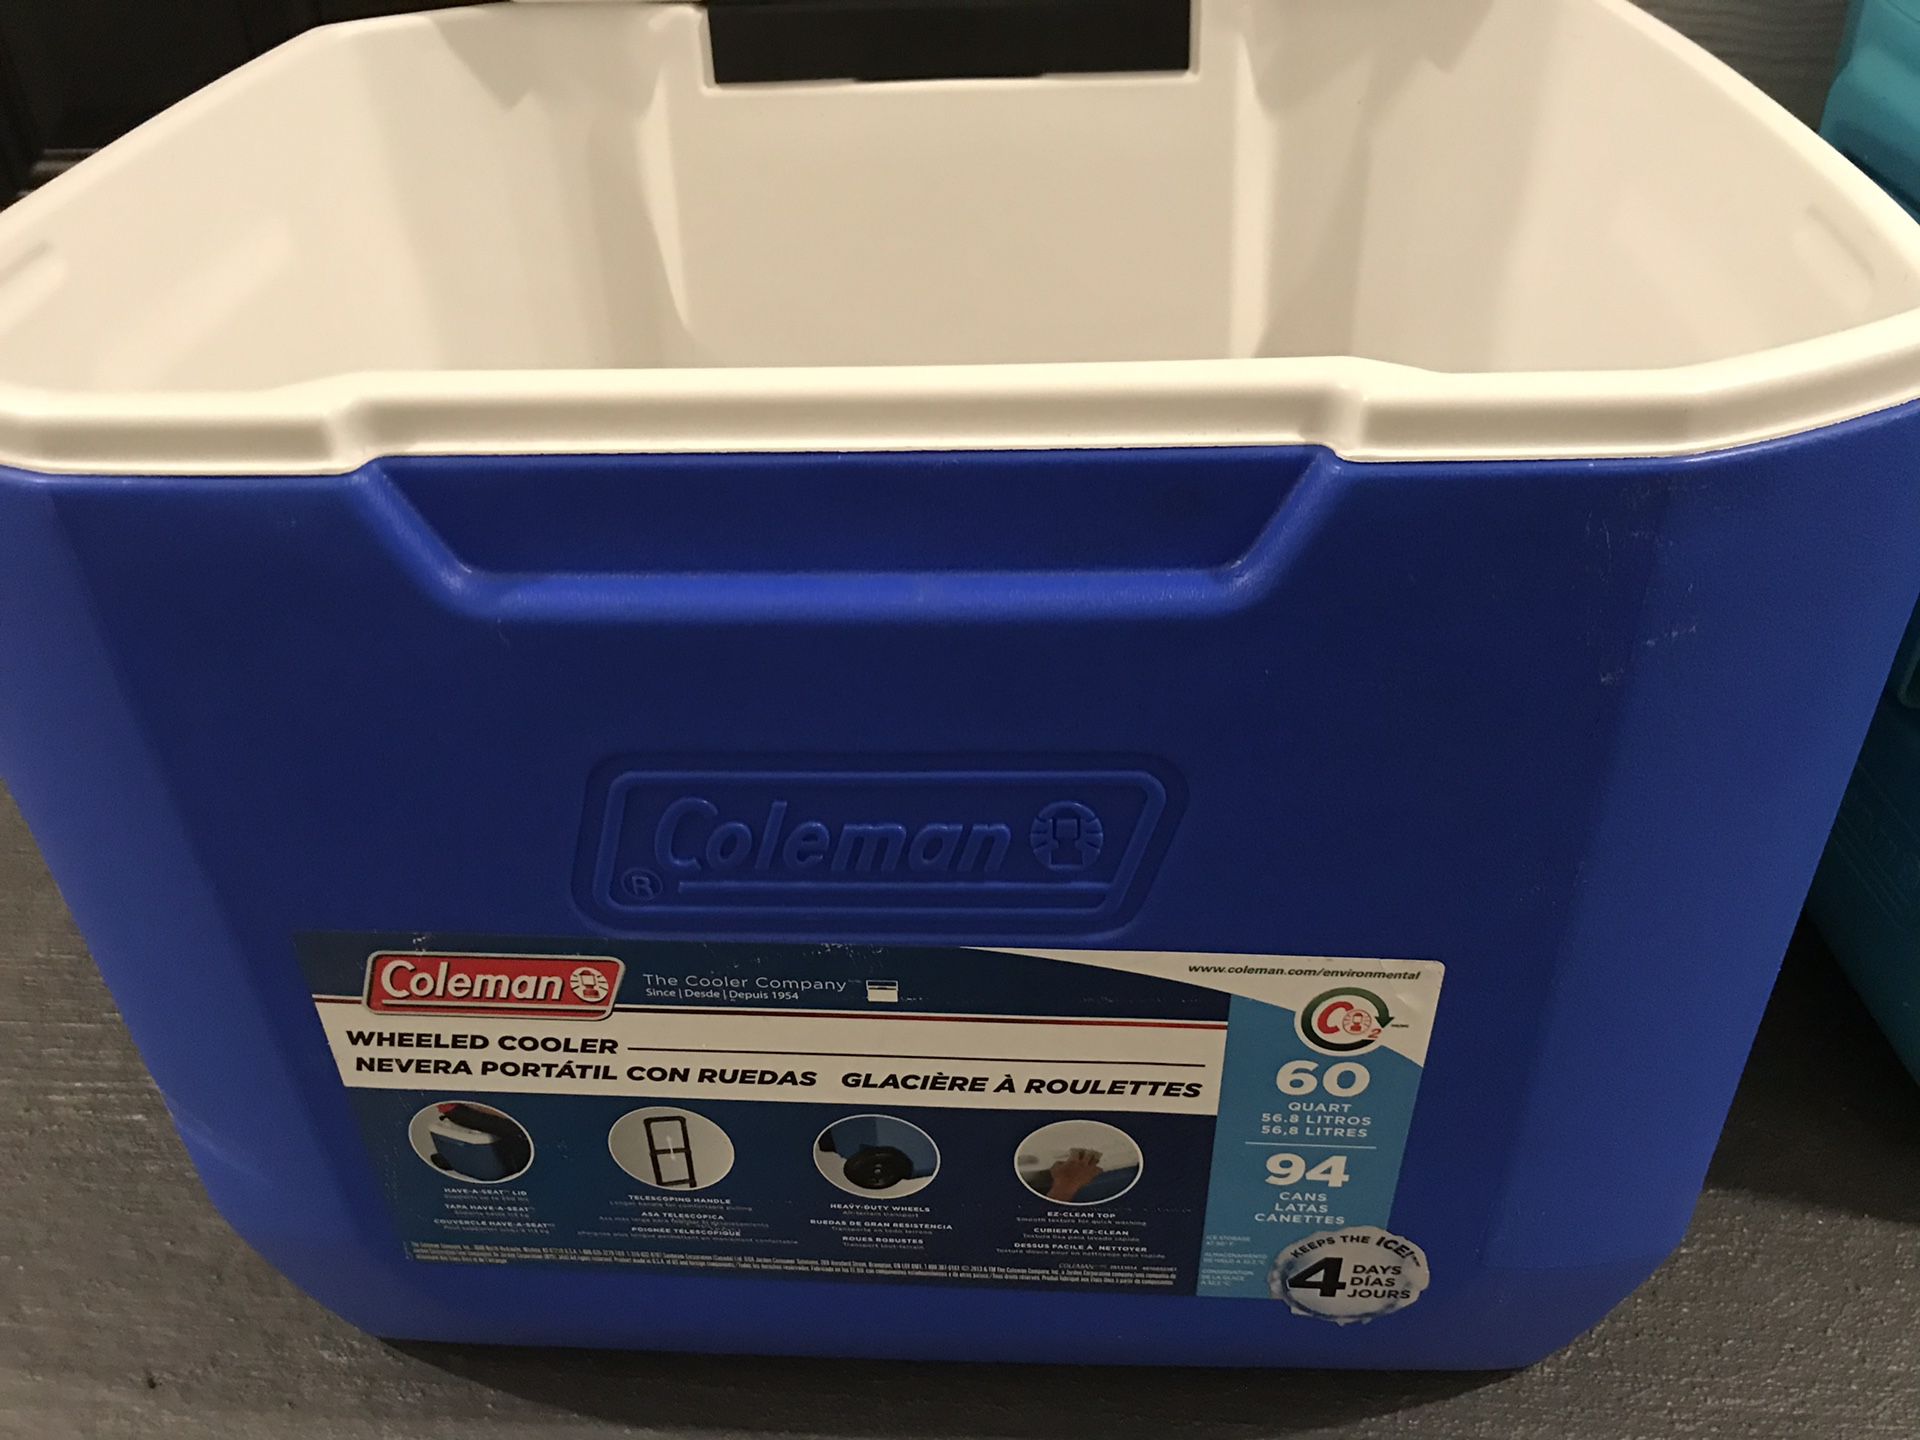 2 coolers 60 qt and 70 qt. Each comes with a free folding chair